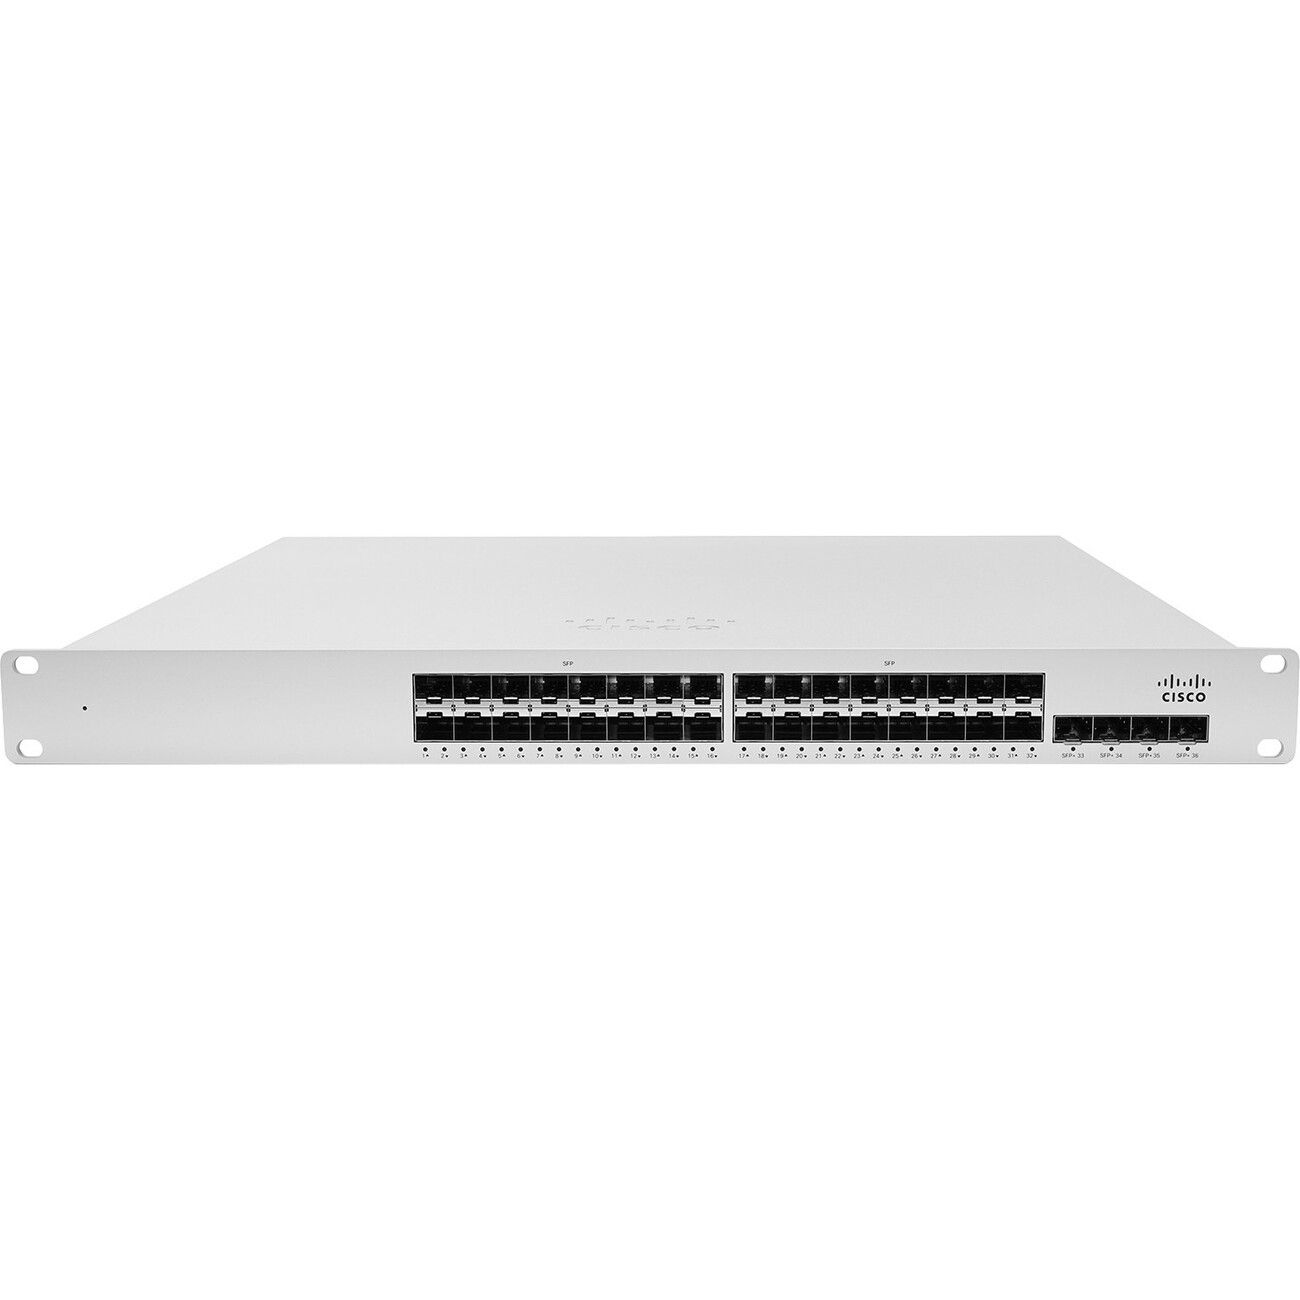 Cisco Meraki Cloud-Managed 32 Port 1GbE Aggregation Switch MS410-32-HW (810979012474 Networking Equipment Switches Gigabit Switches) photo